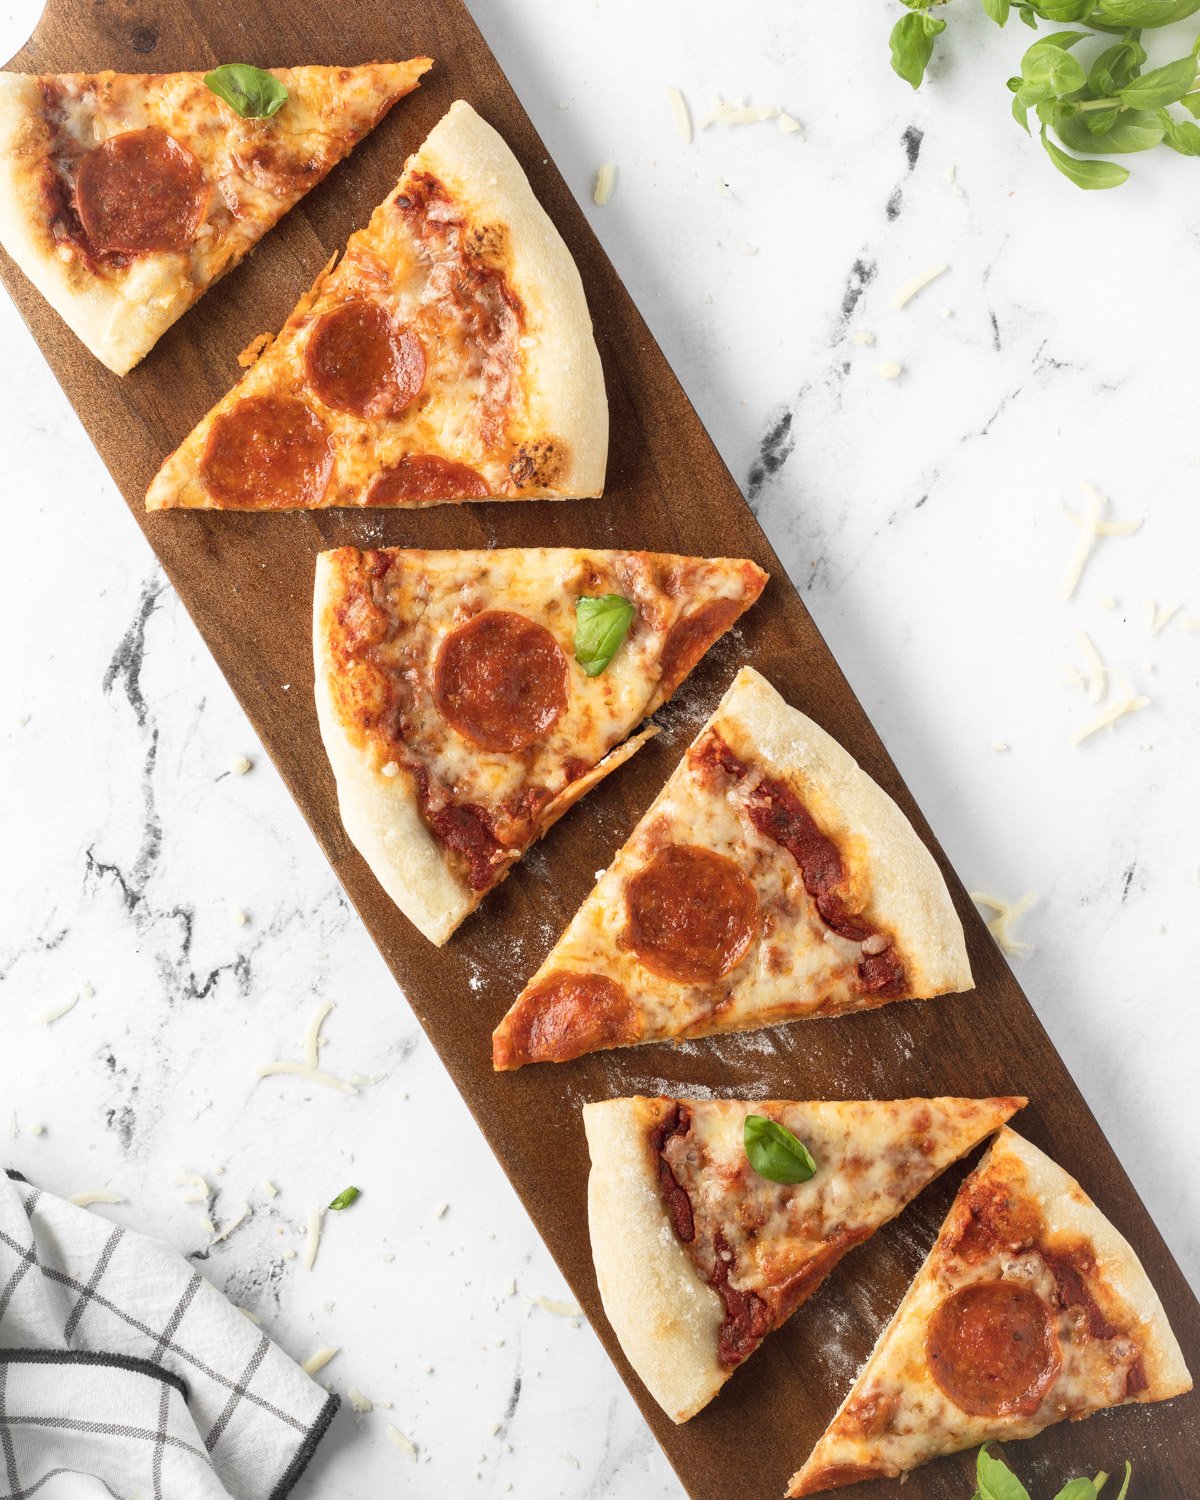 Pepperoni pizza slices on a wooden board.